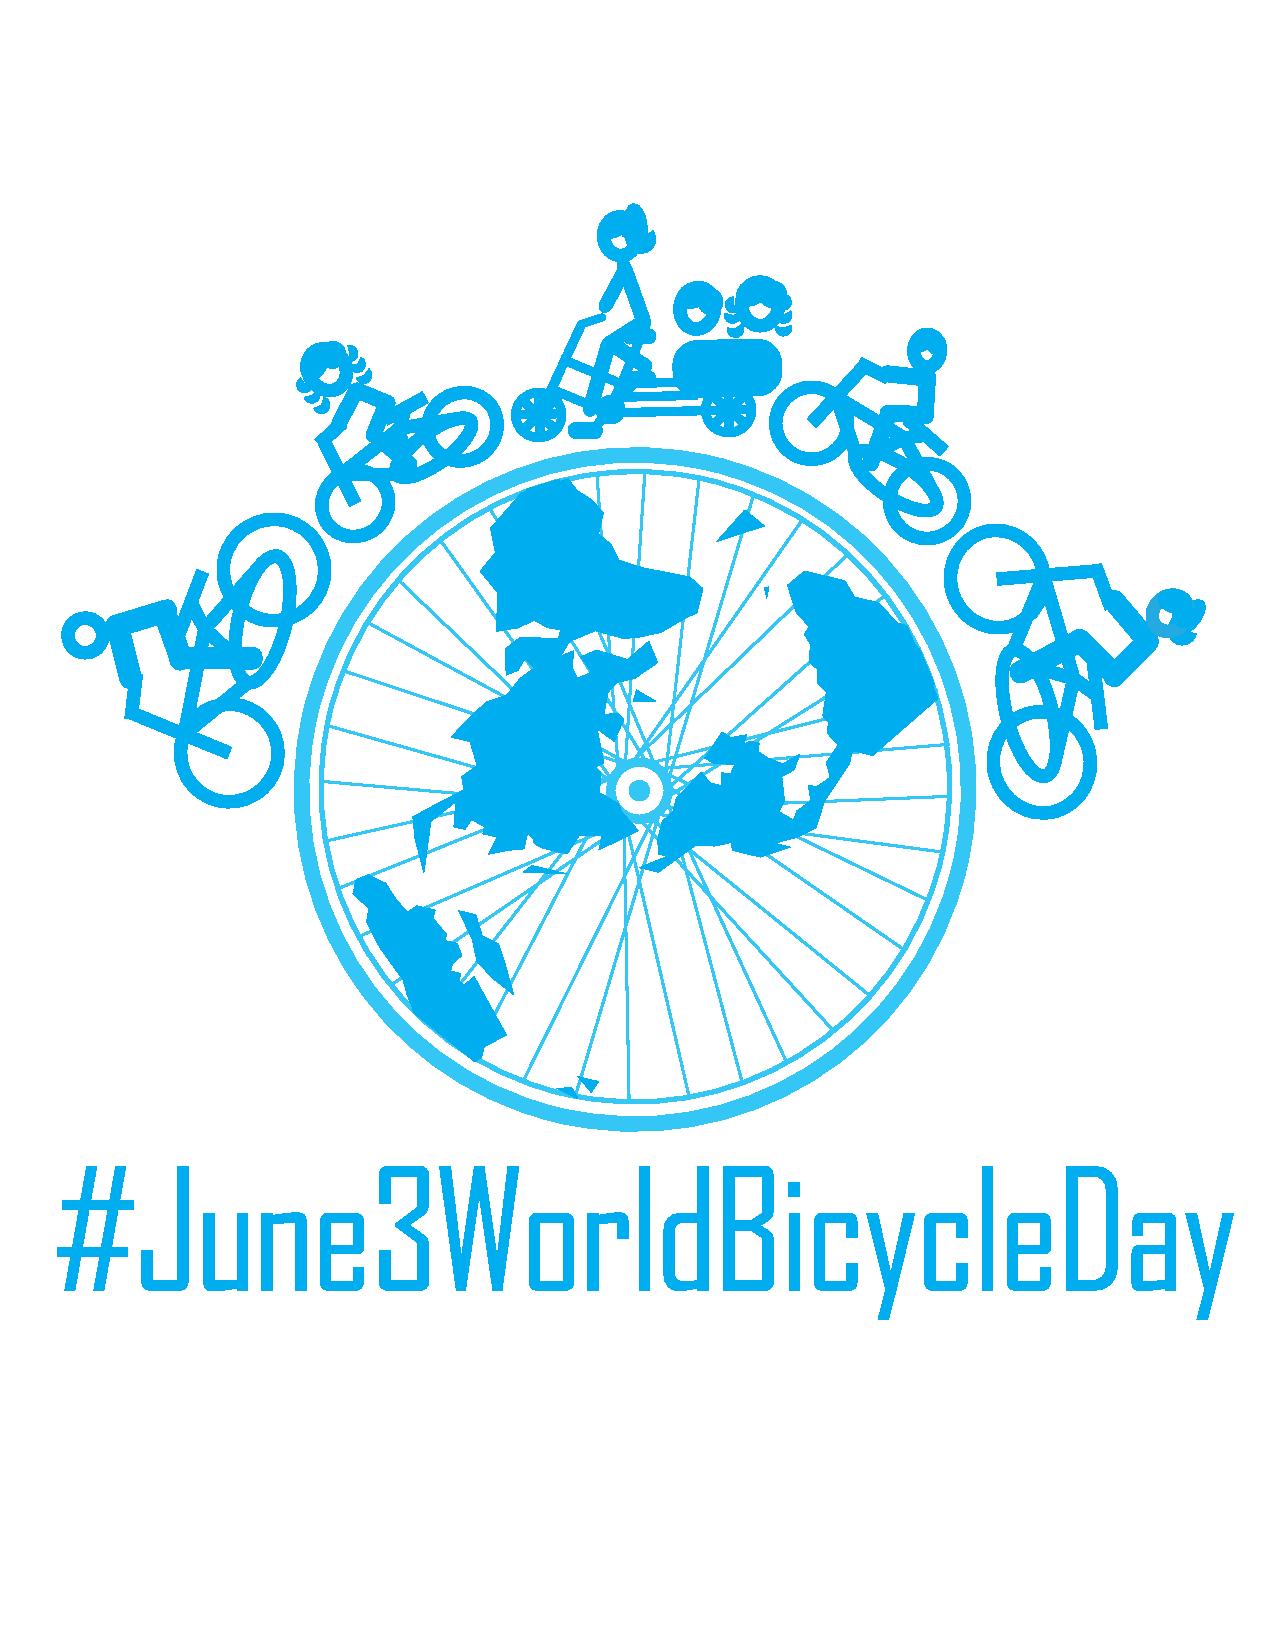 Happy world bicycle day